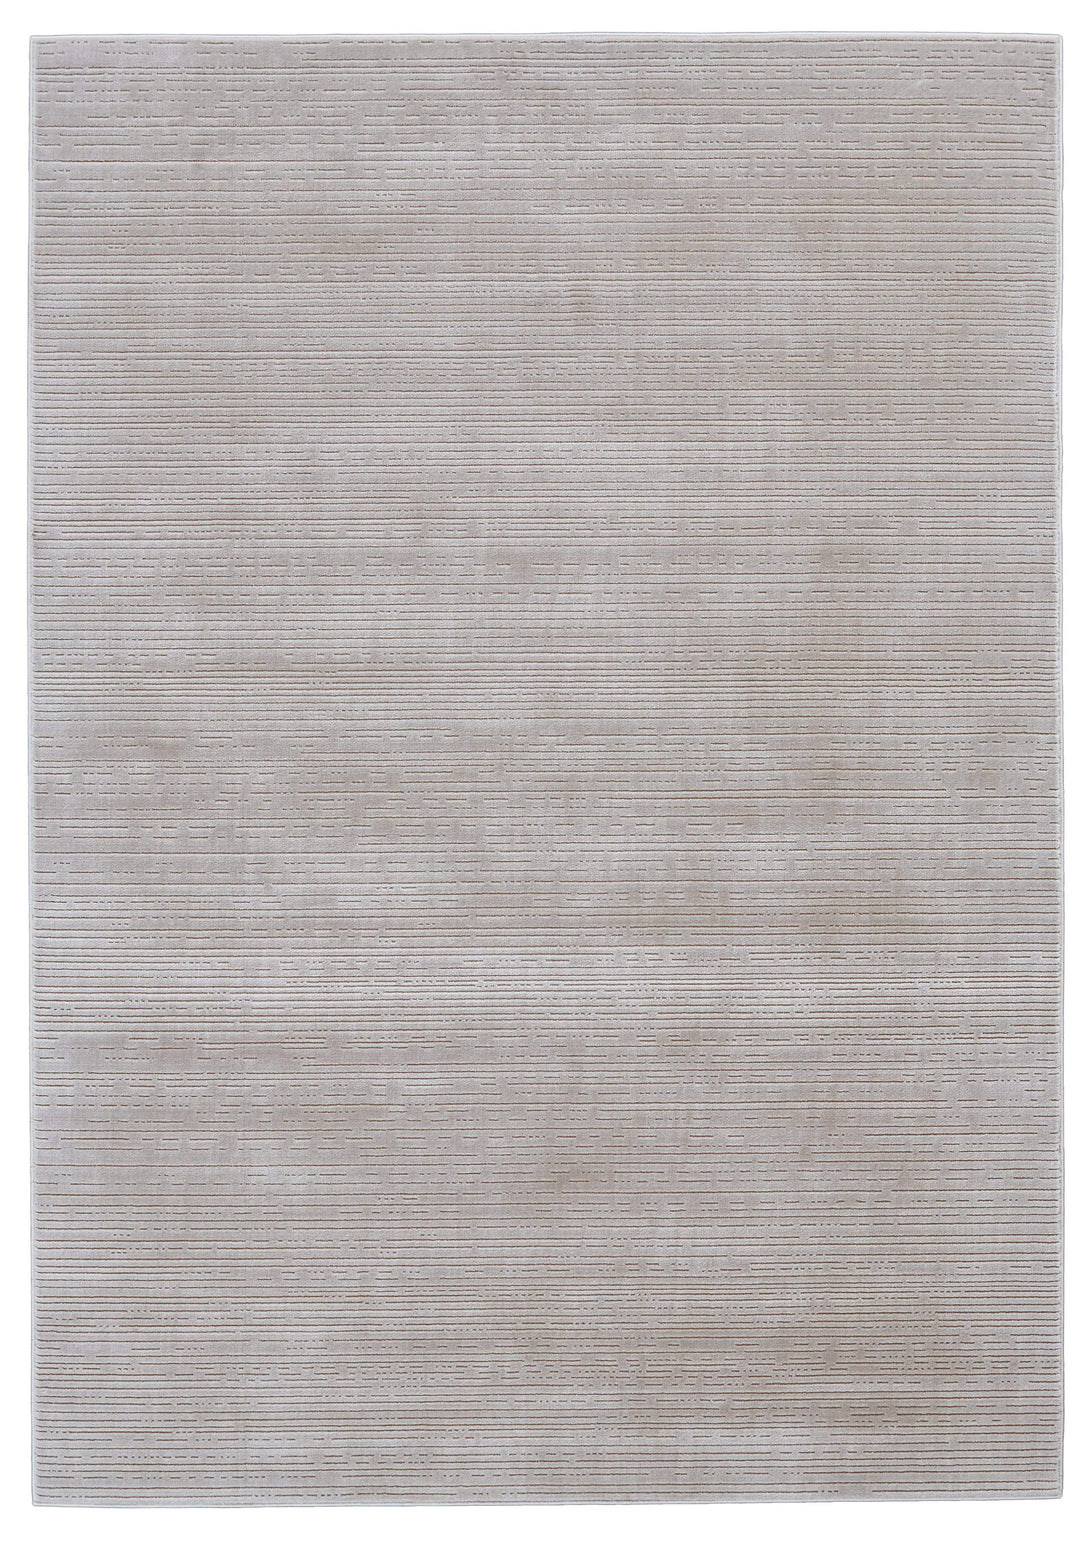 Feizy Feizy Melina Modern Contemporary Rug - Available in 6 Sizes - Taupe & Gray 5' x 8' 7143400FBIRWHTE10